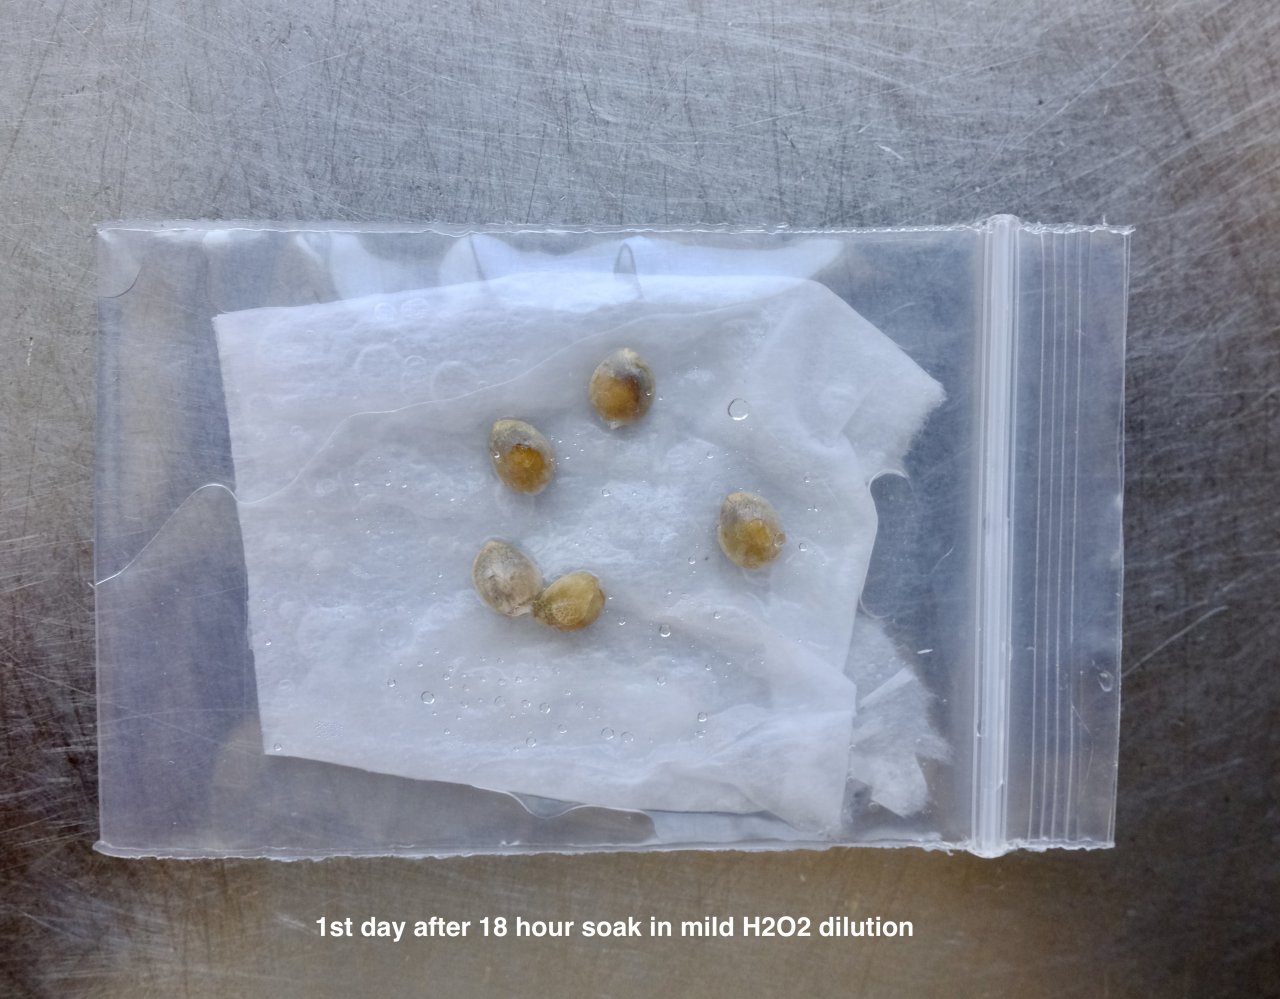 Attempt to germinate immature Mulanje seeds - day 1